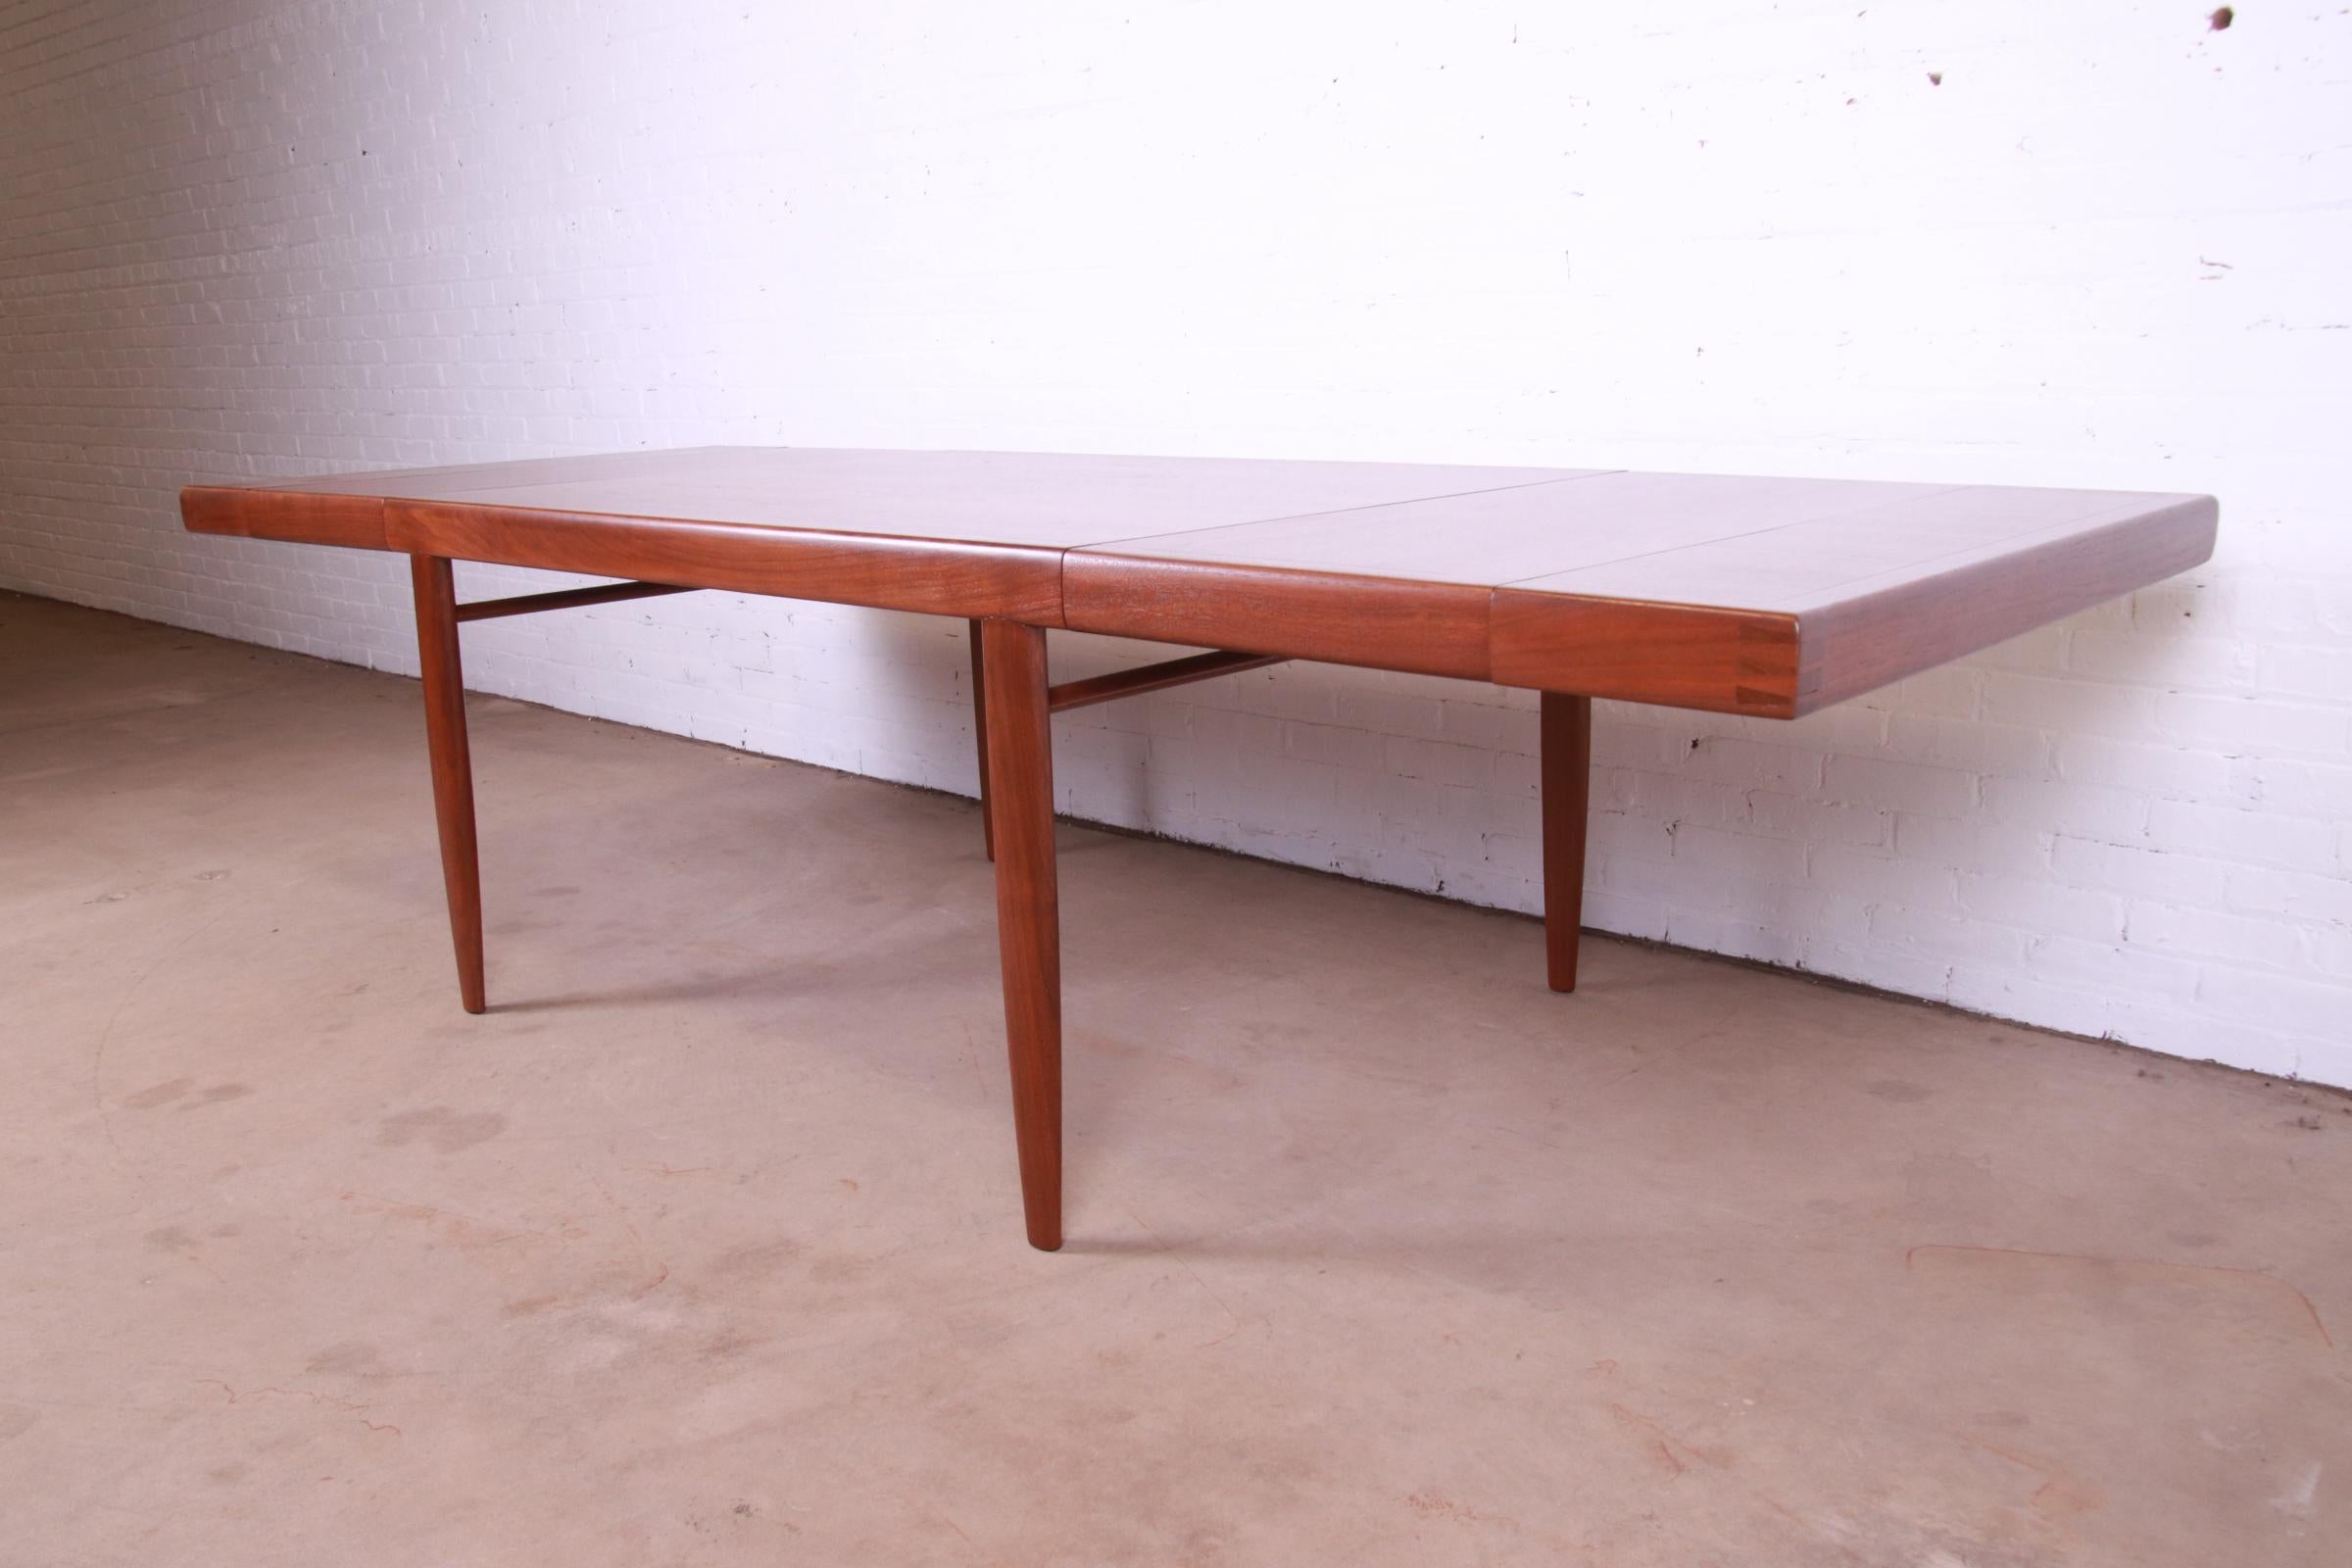 American George Nakashima for Widdicomb Origins Collection Walnut Dining Table, 1958